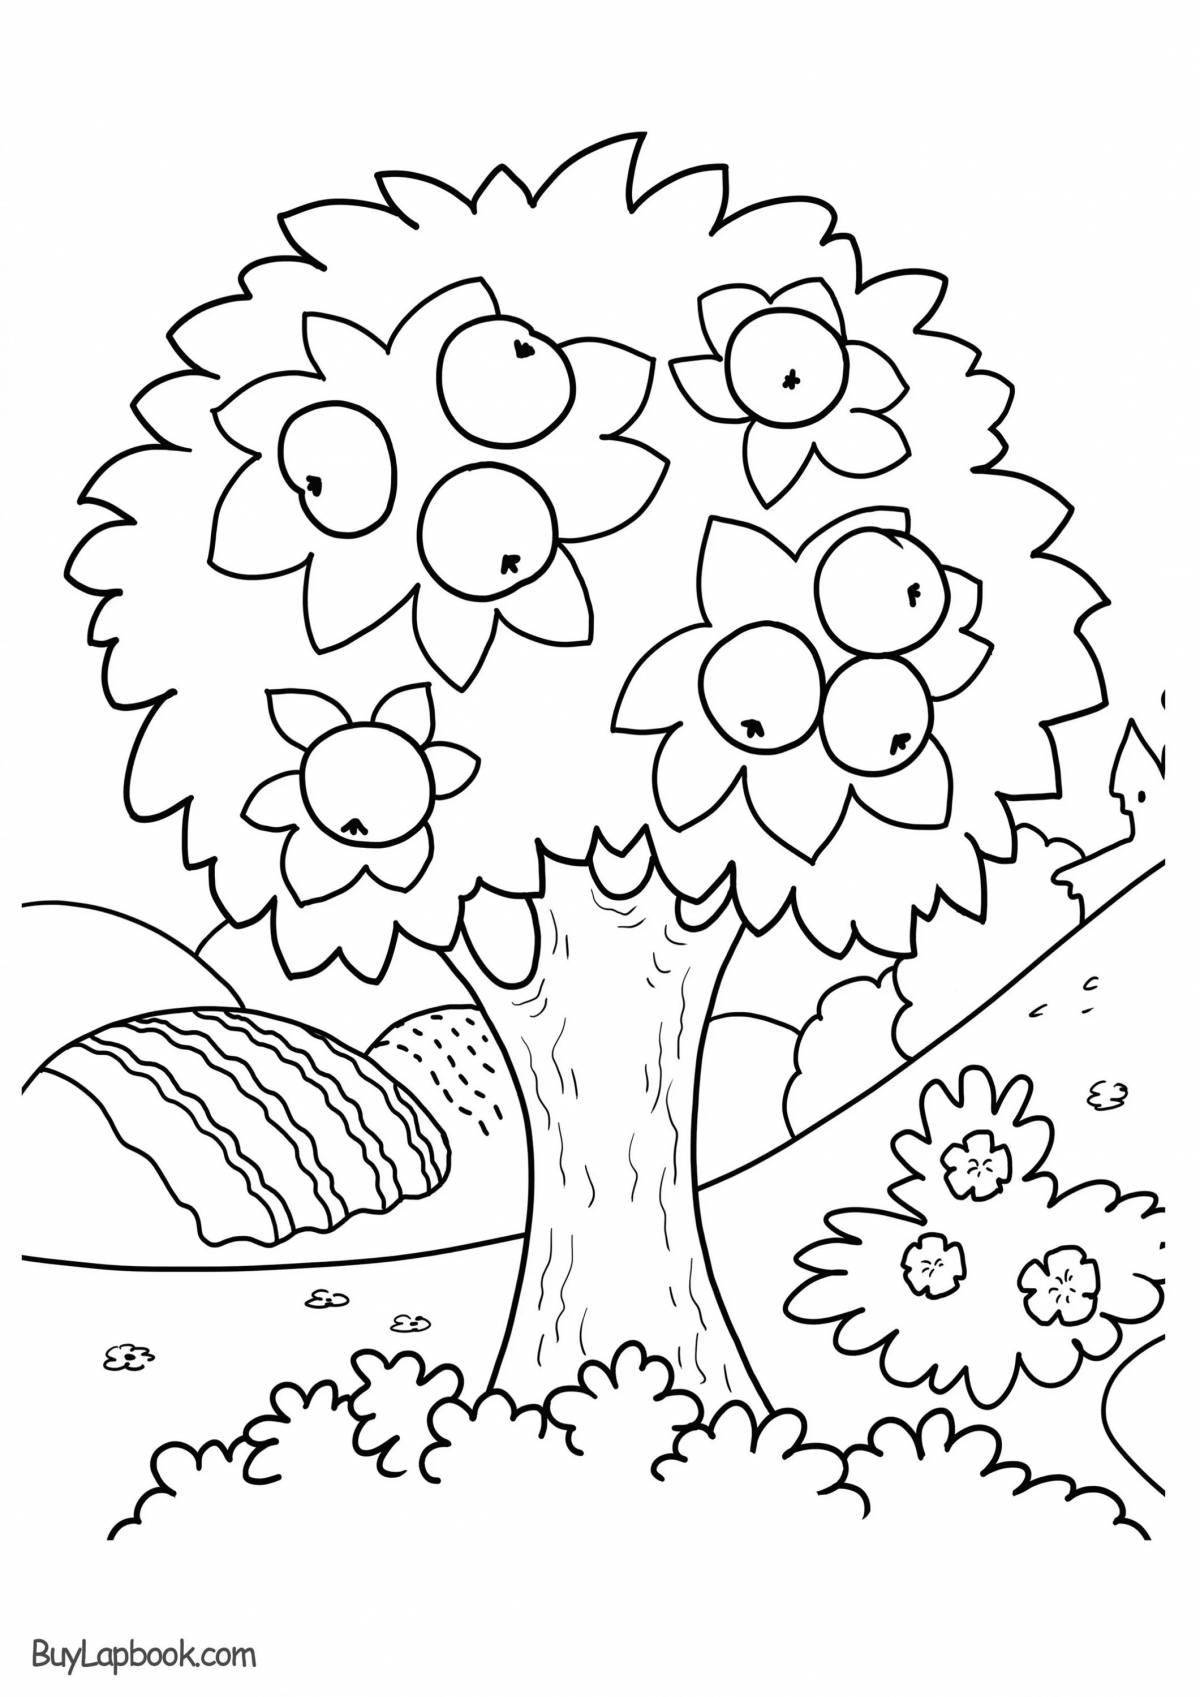 Apple tree live coloring